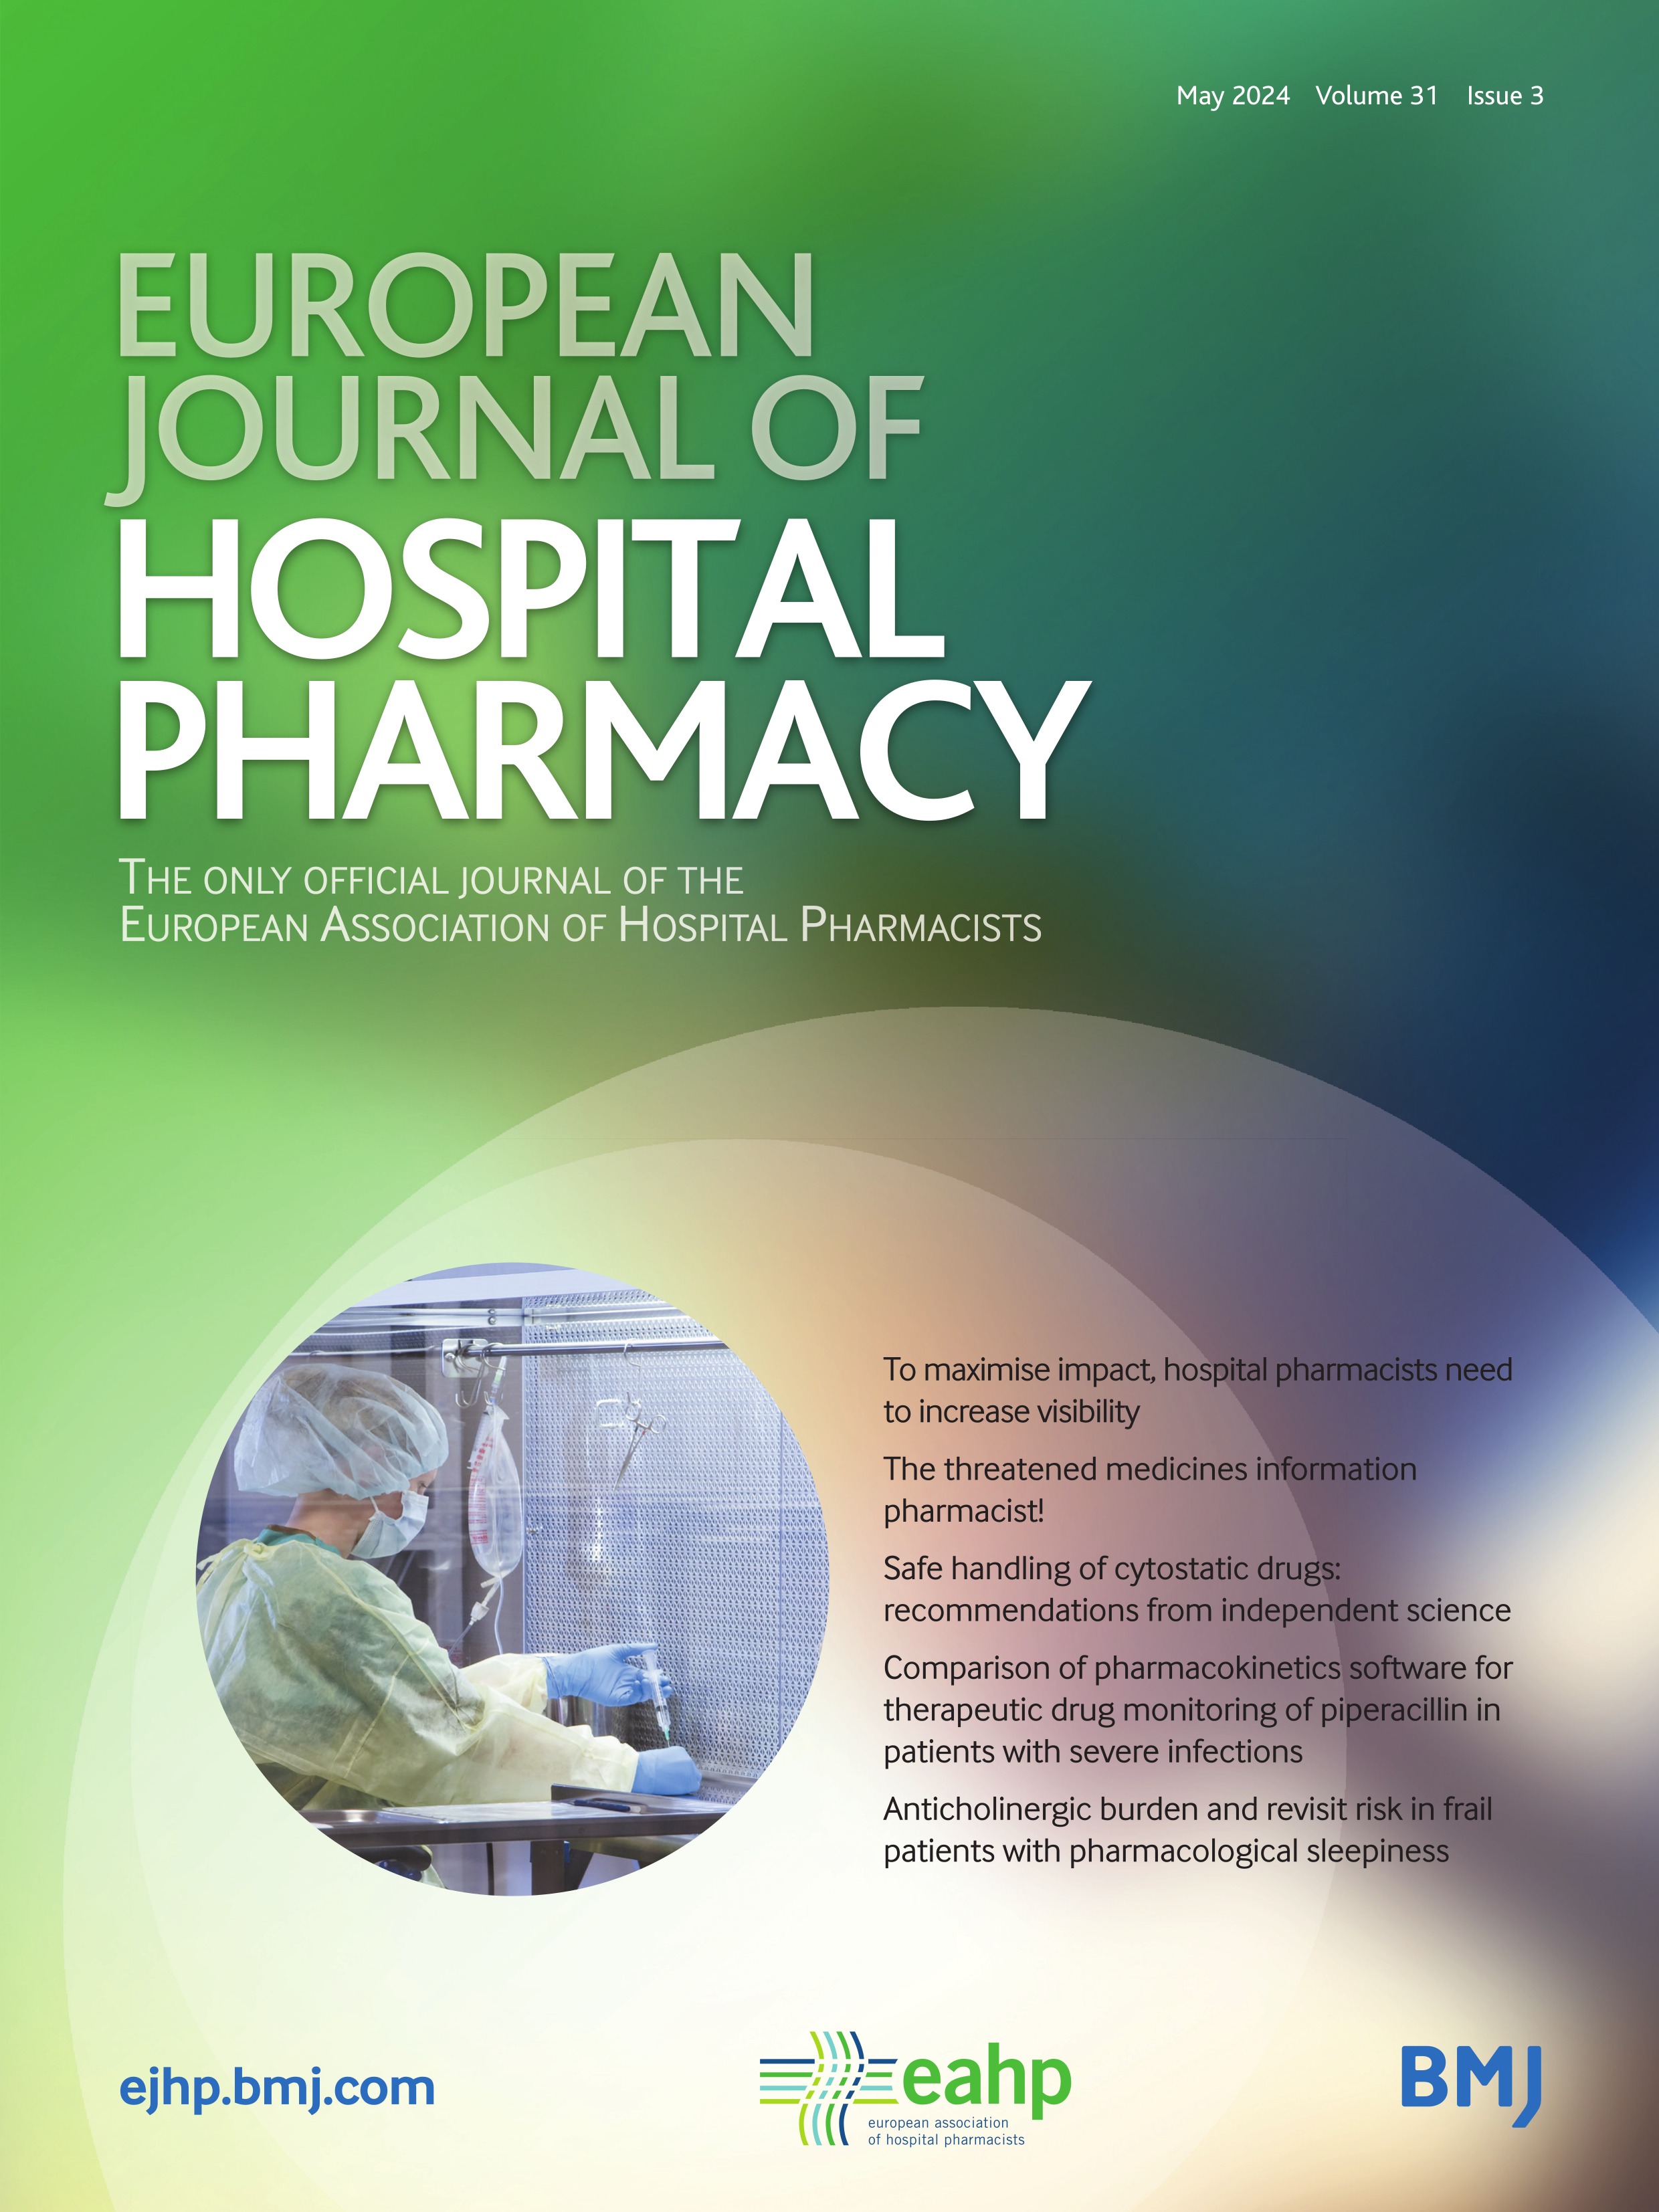 Anticholinergic burden and revisit risk in frail patients with pharmacological sleepiness